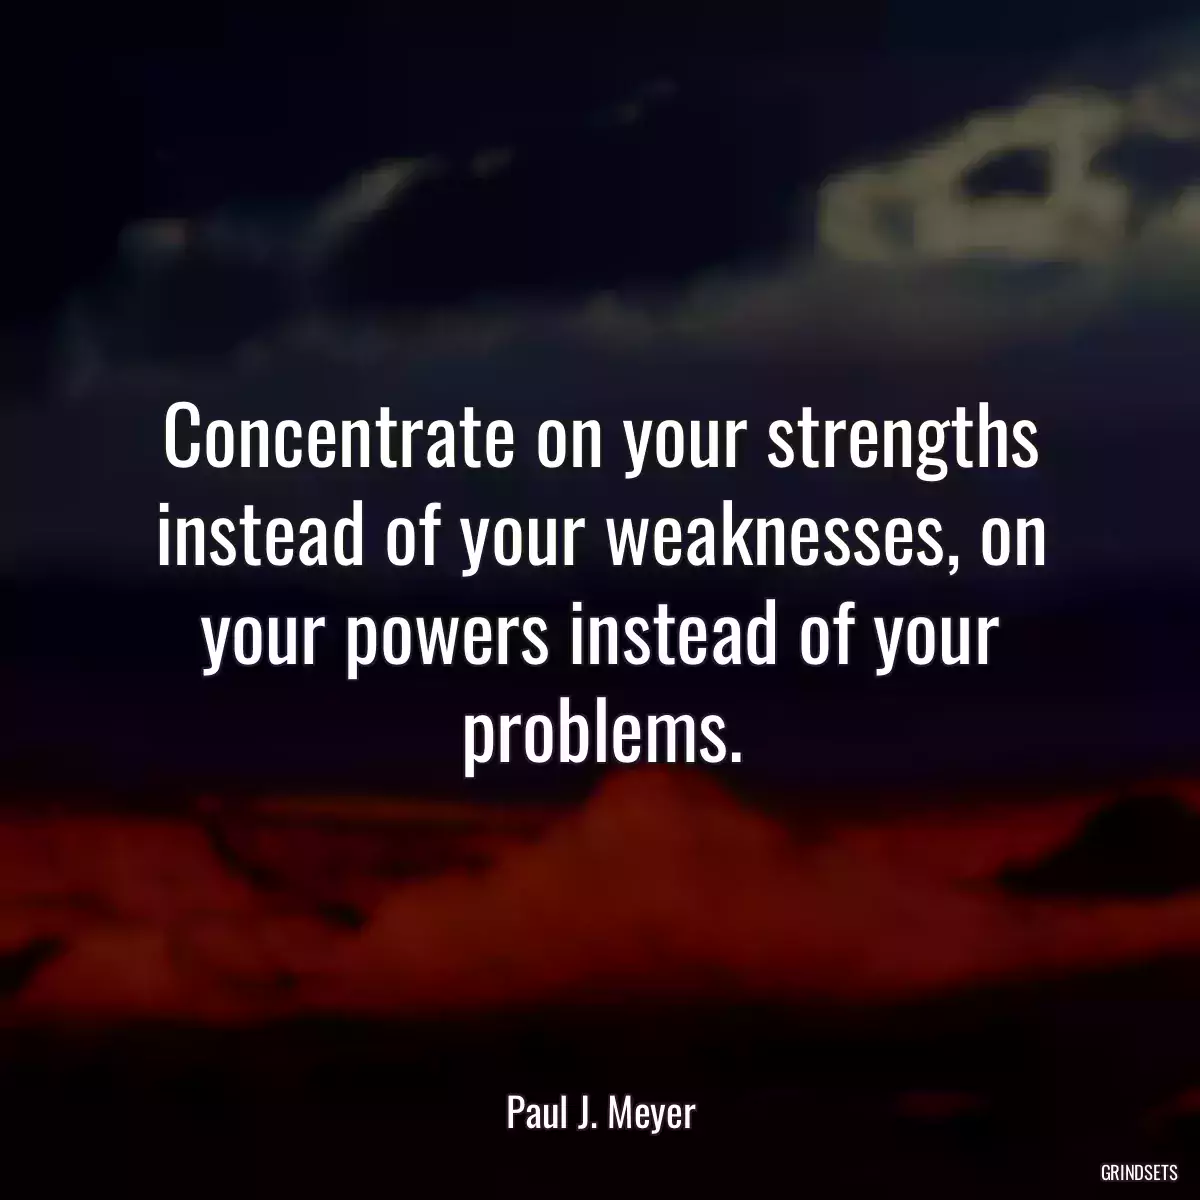 Concentrate on your strengths instead of your weaknesses, on your powers instead of your problems.